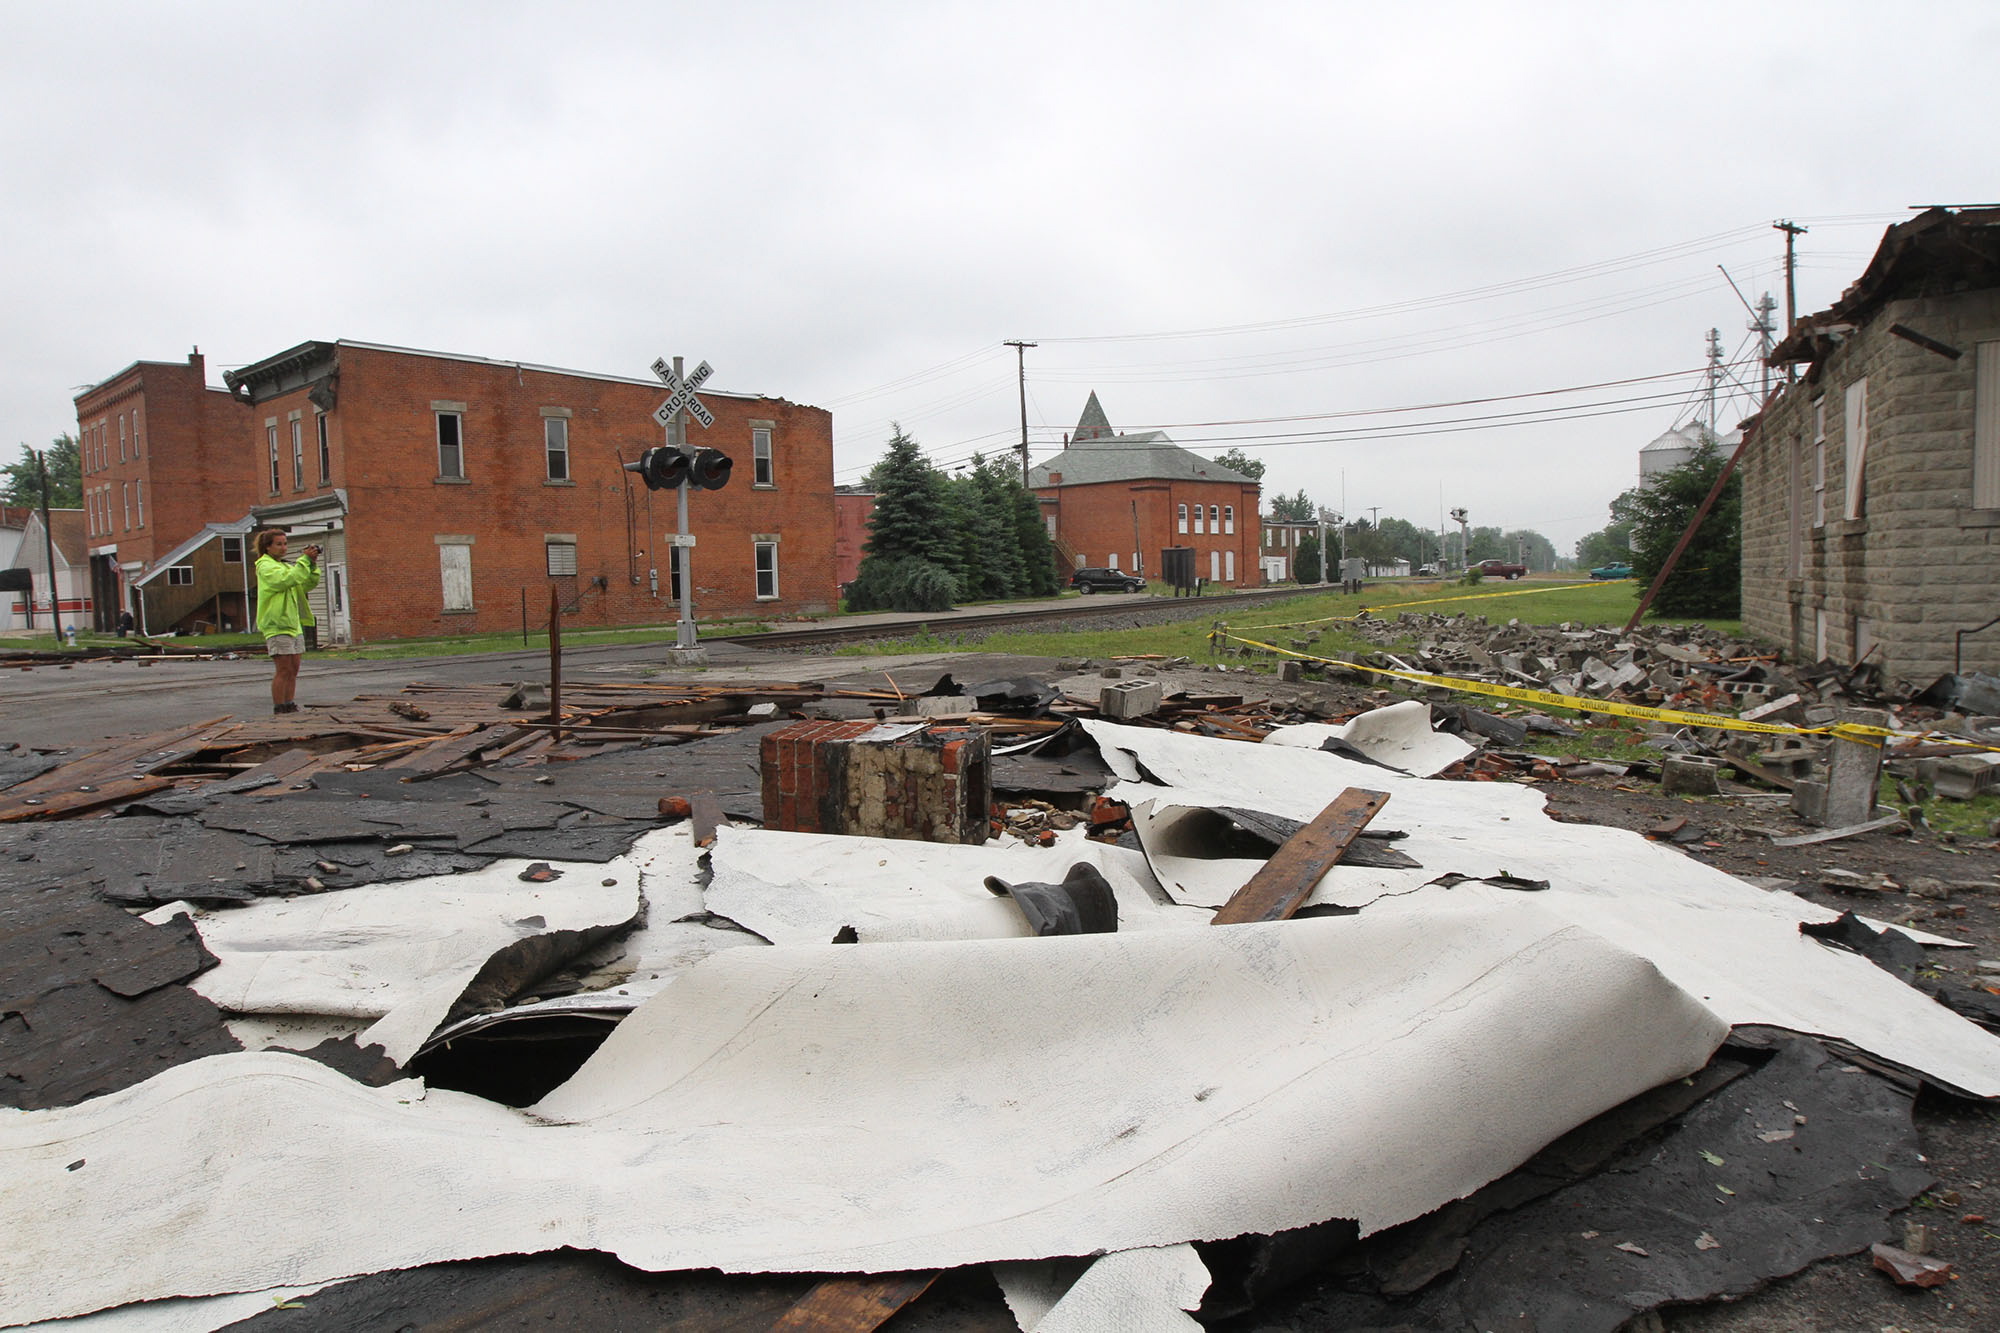 Fragments of splintered roofing lie scattered across North Water Street in Caledonia, Ohio, on Thursday.